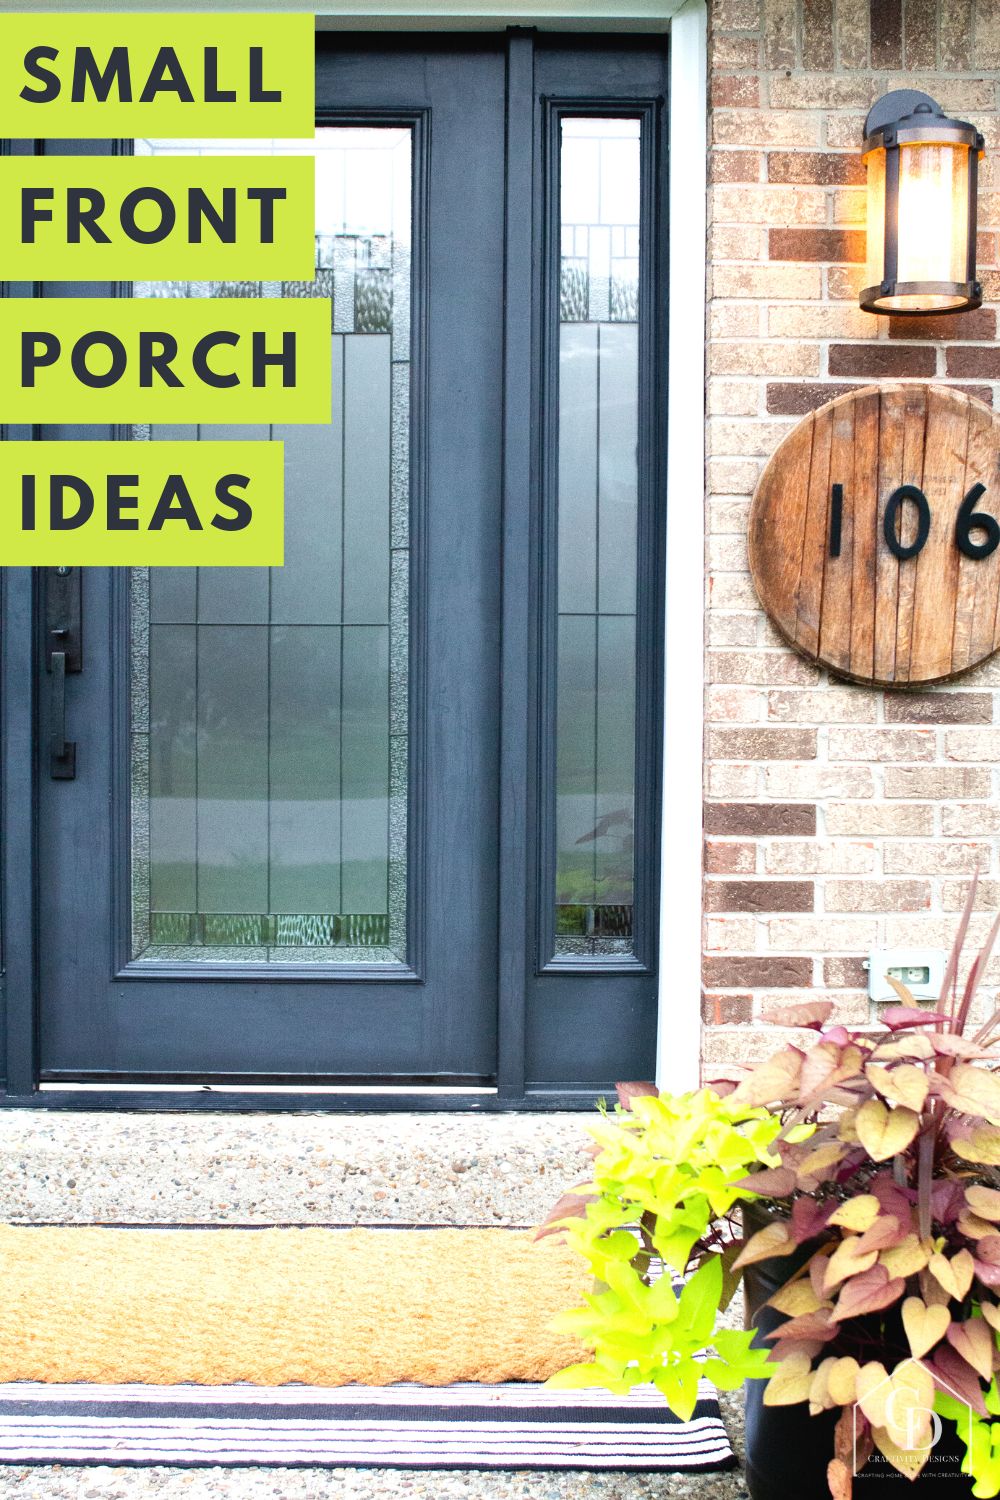 5 Small Front Porch Ideas (on a Budget!) – Craftivity Designs